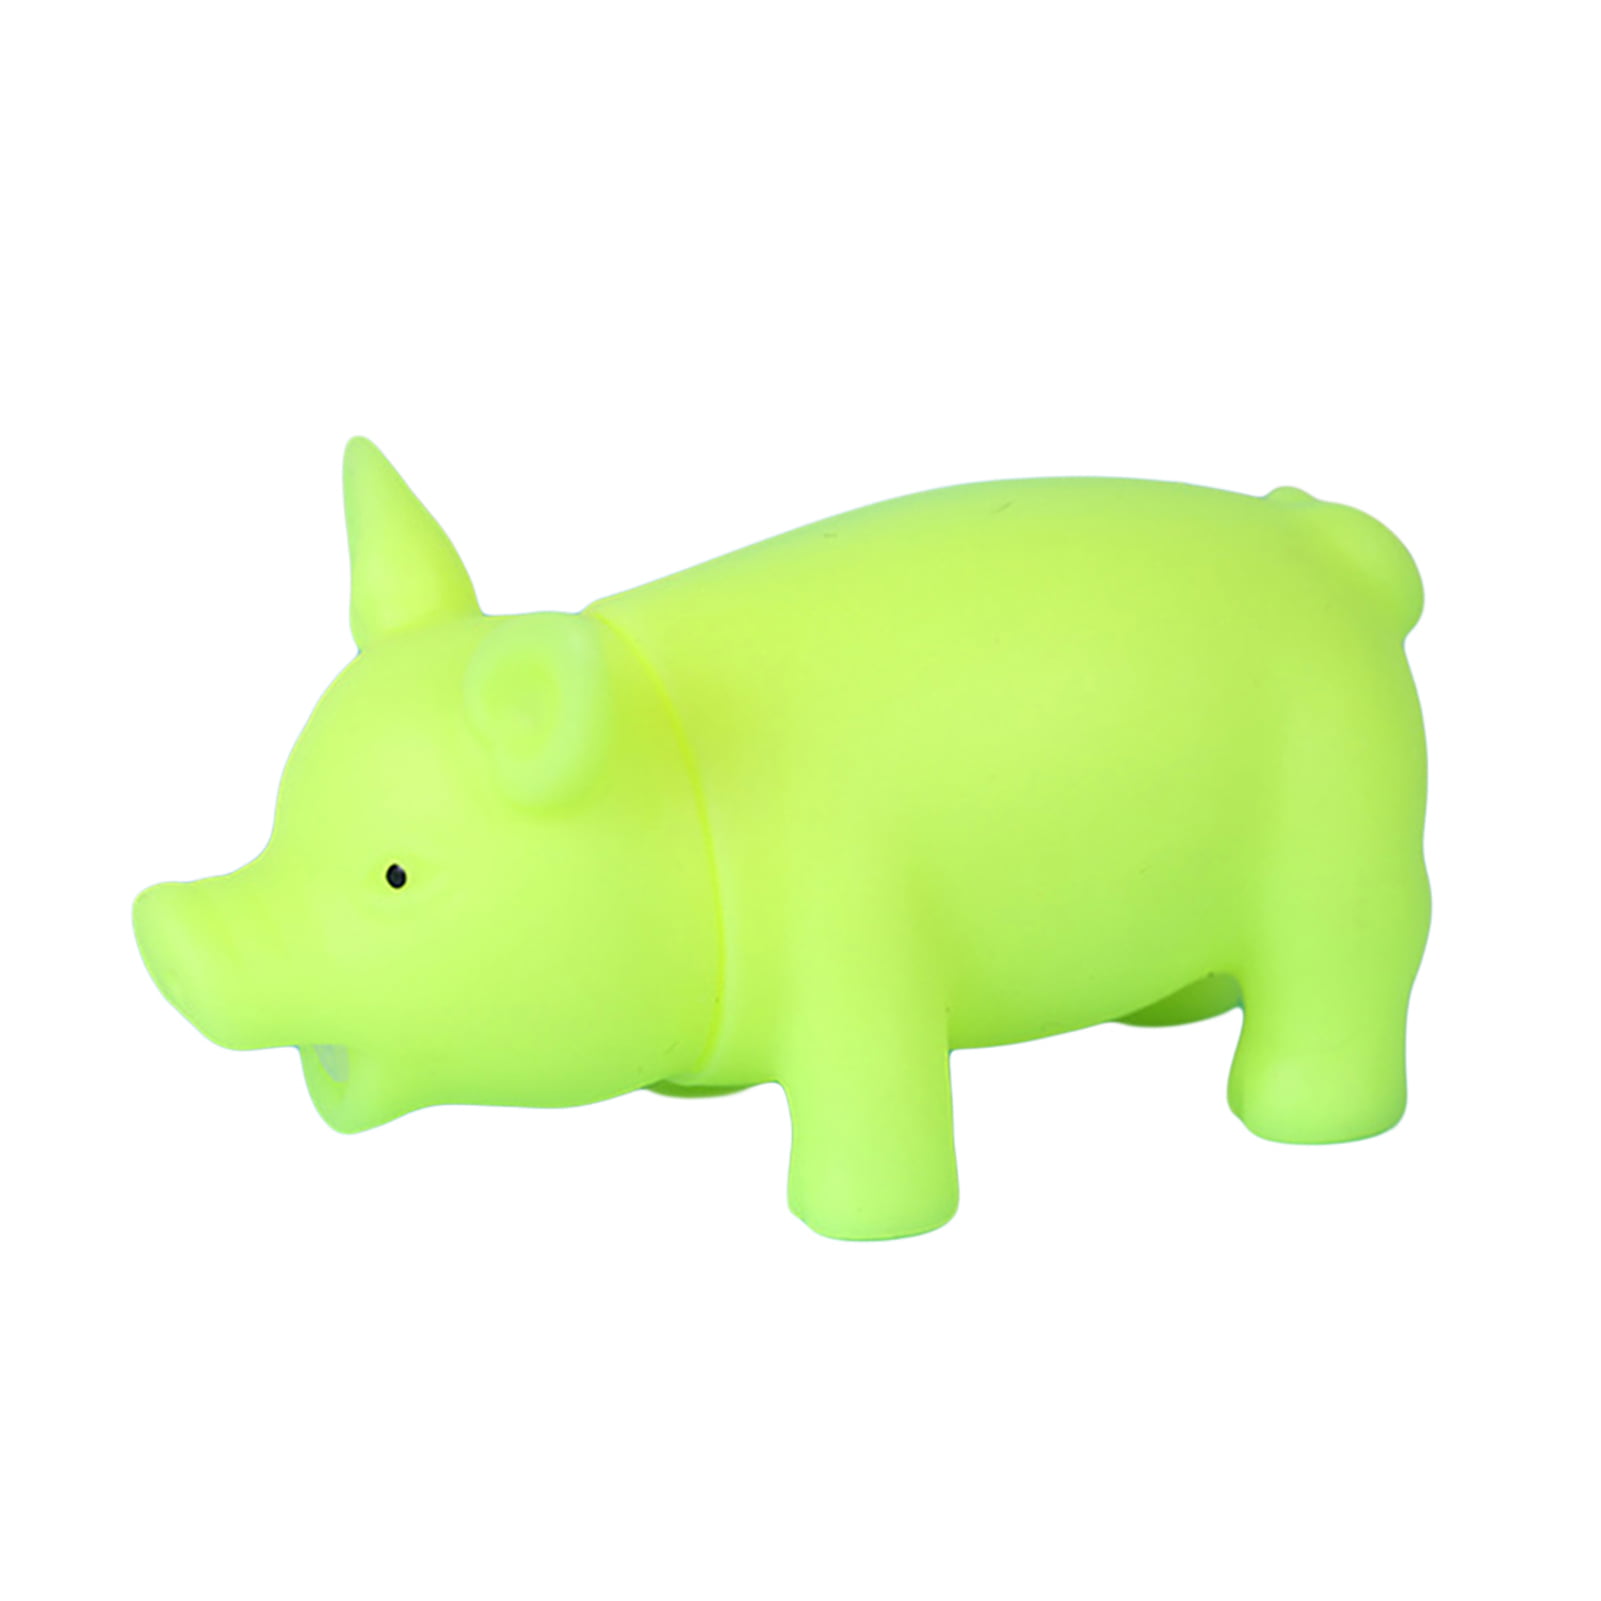 Mini Pig Animal Chew Sound Play Pig Squeaker Squeaky Kid Toy Gift 5Pcs 